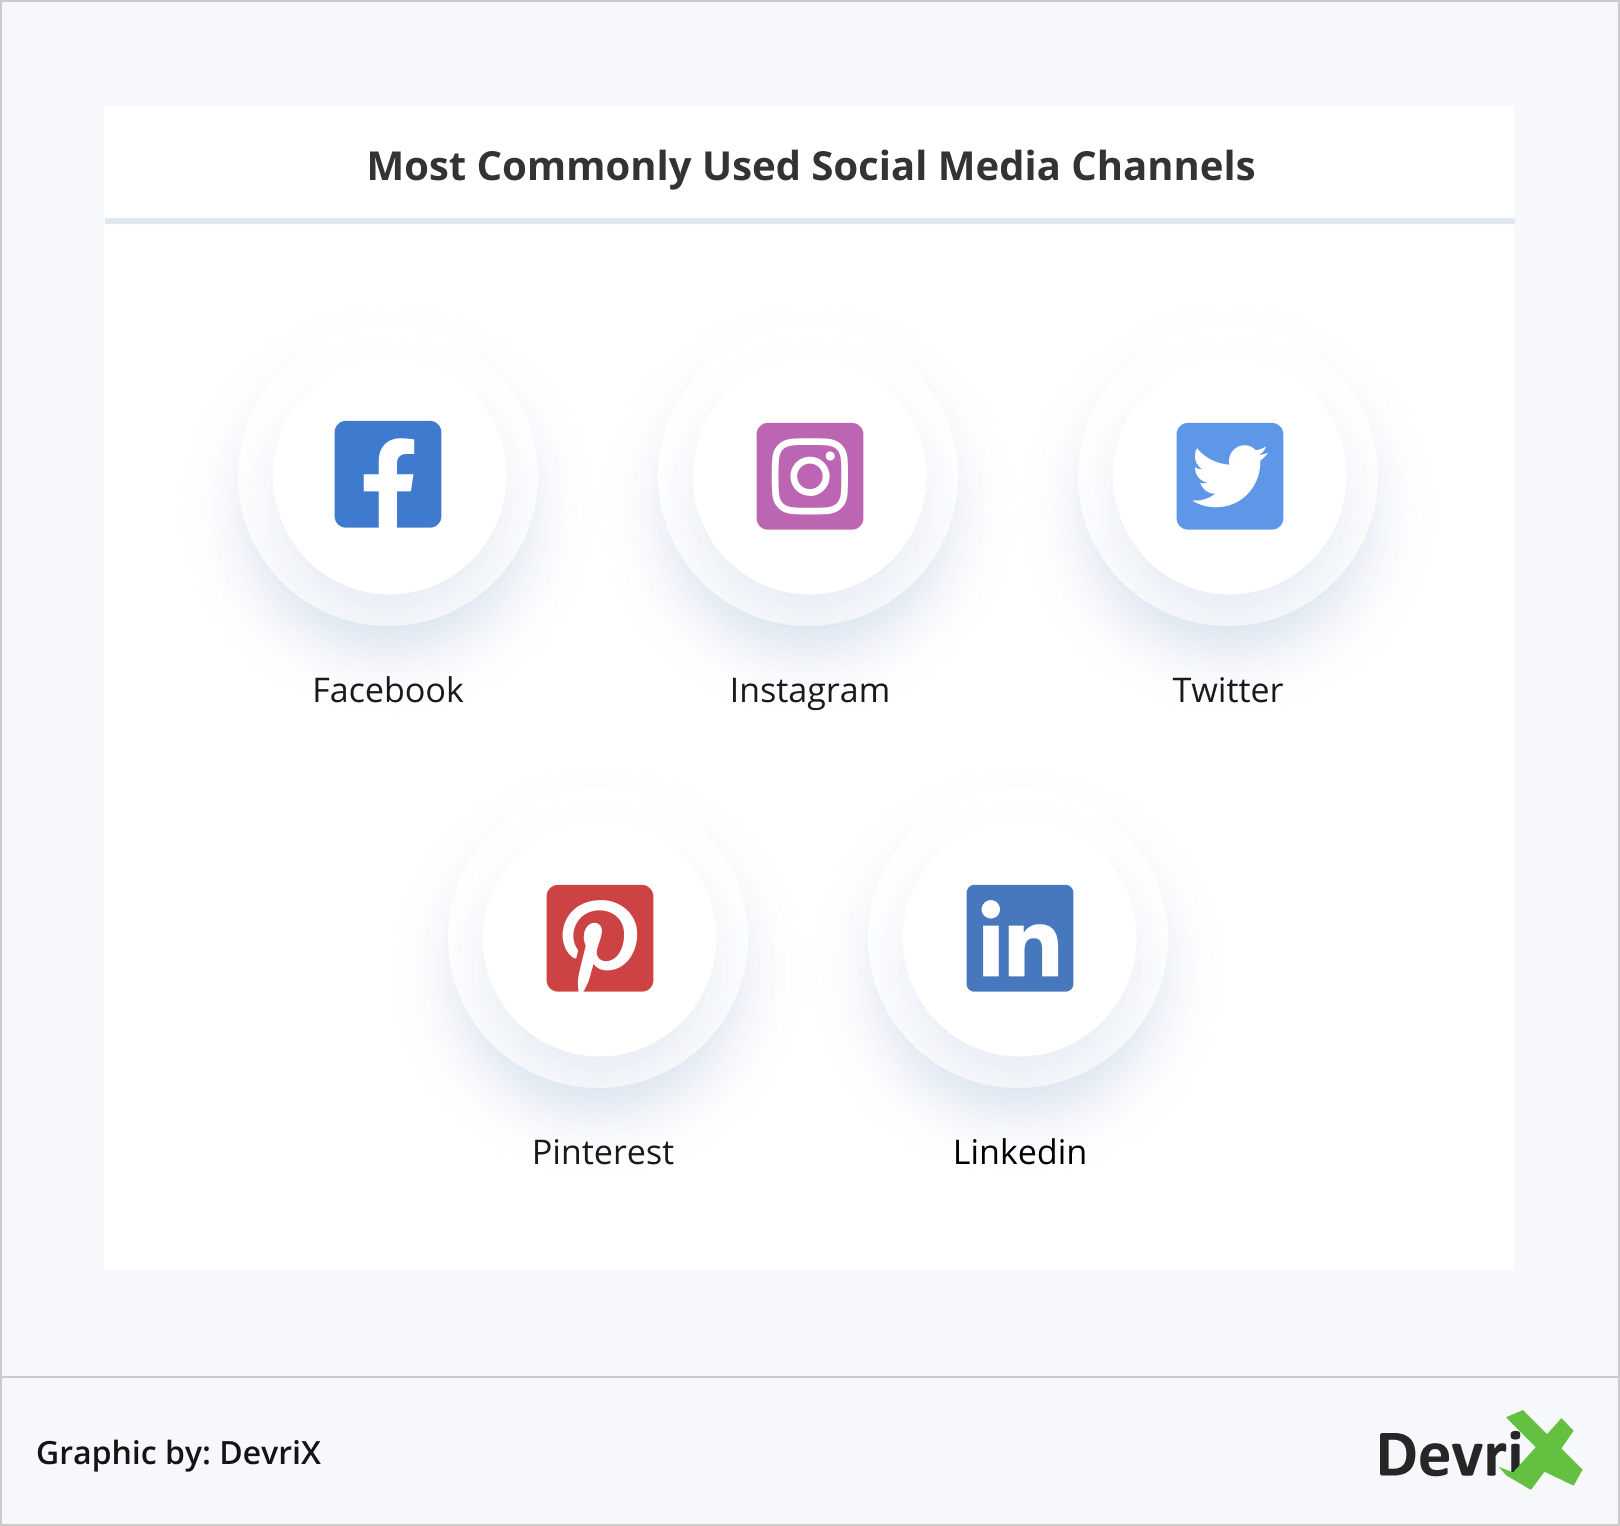 Most Commonly Used Social Media Channels